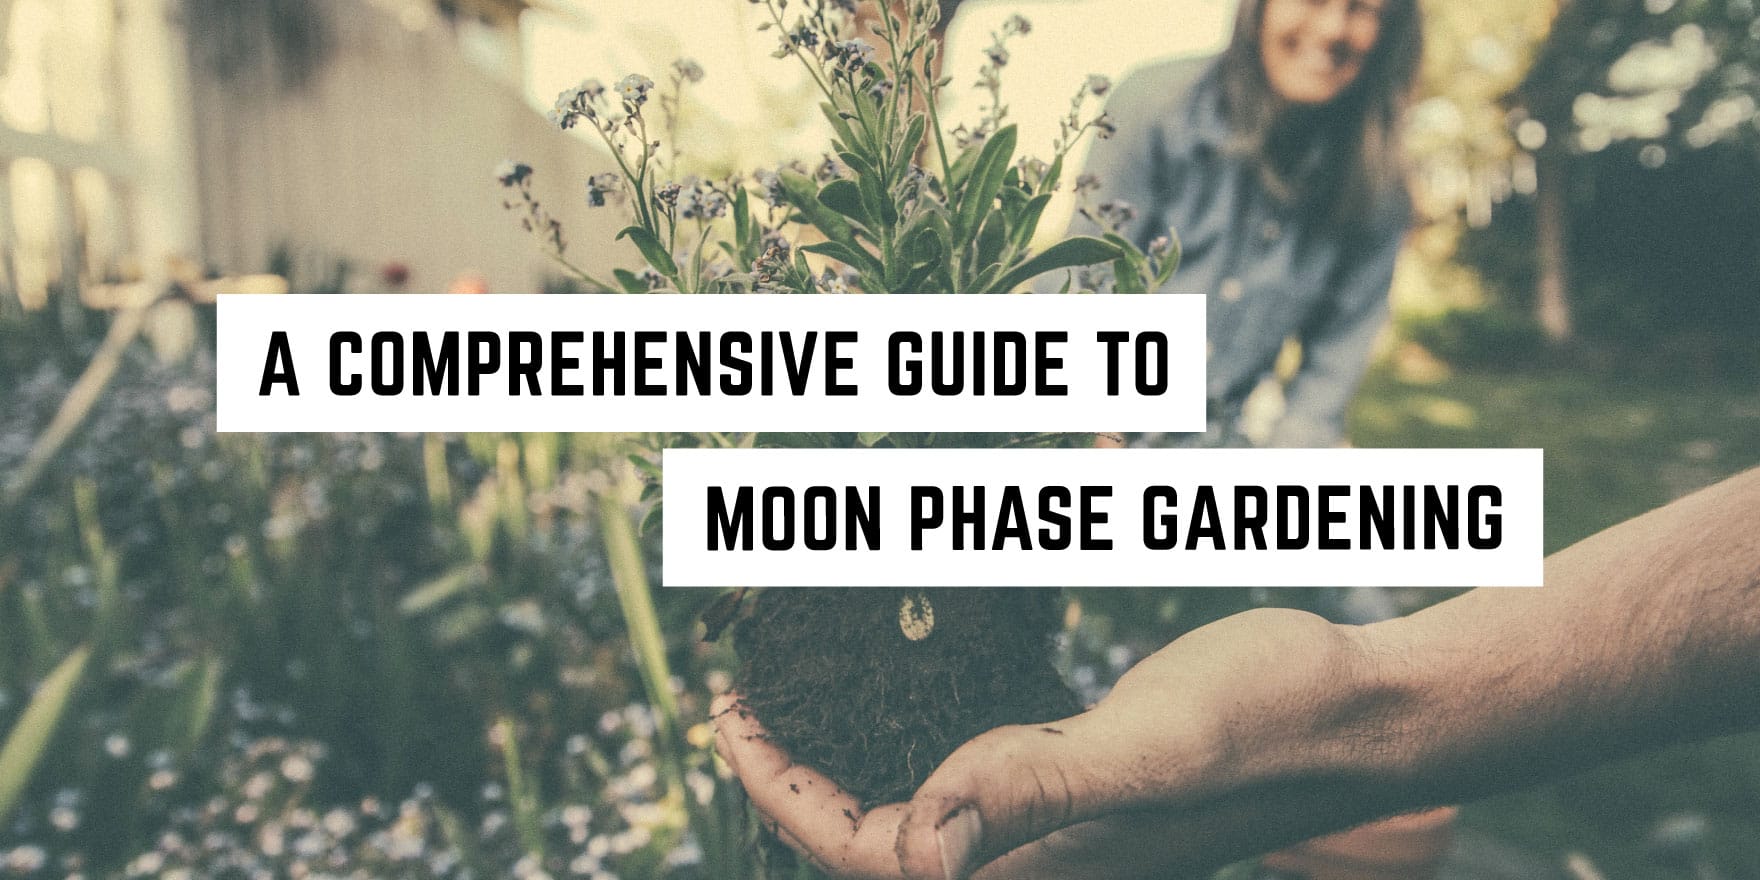 Nurturing nature: embracing the lunar cycle in your garden with metaphysical insights.